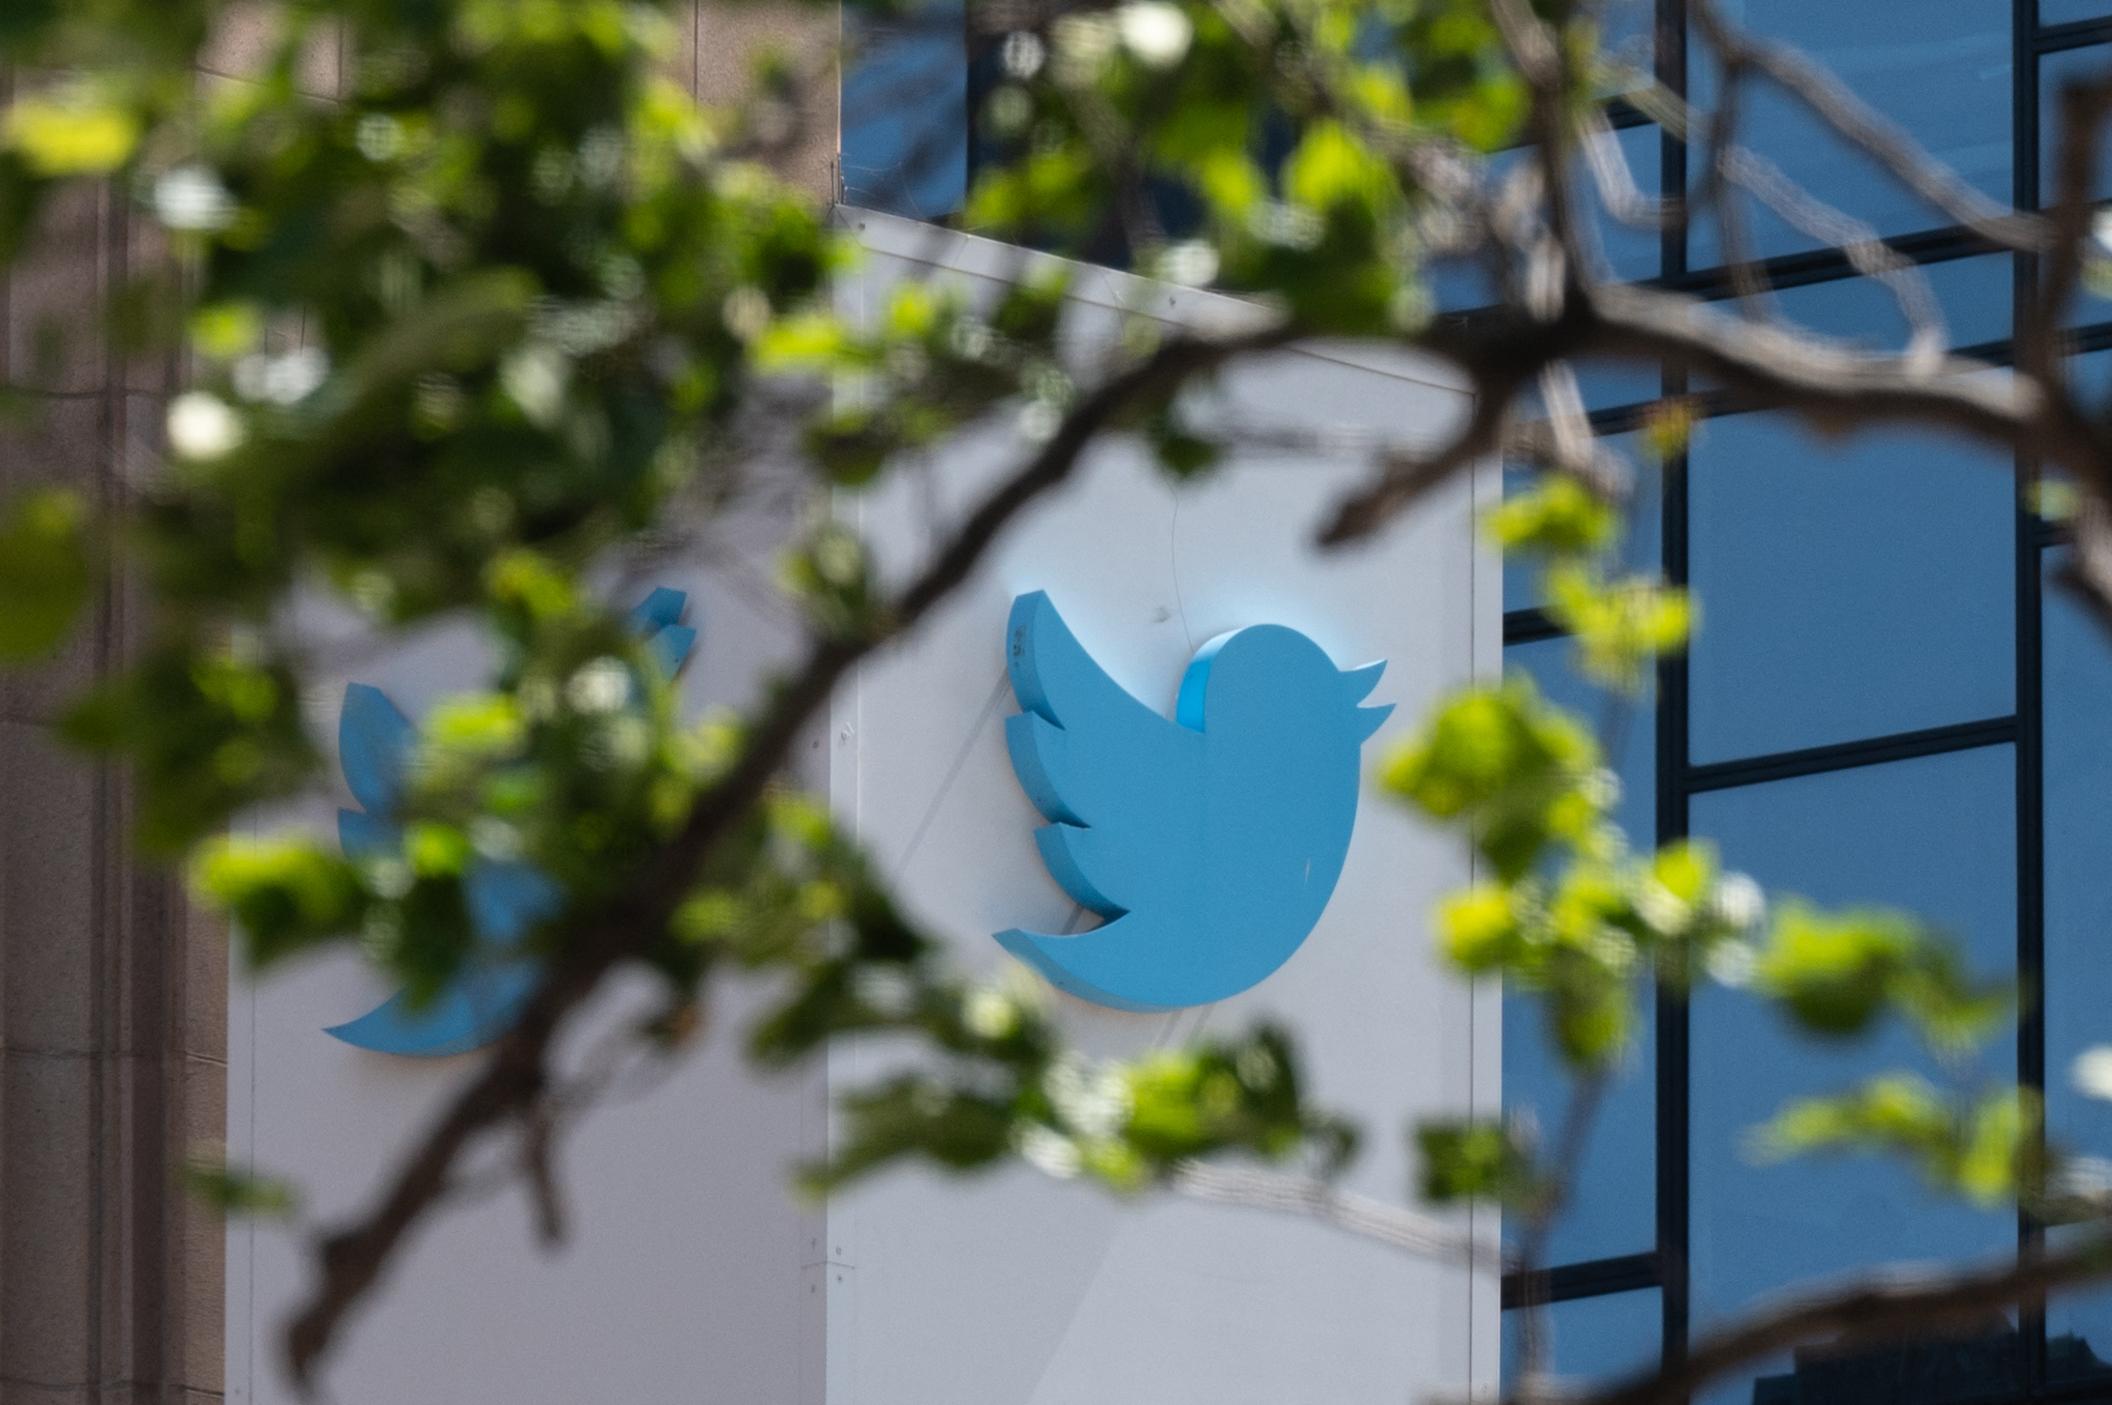 The Twitter logo is seen through some tree branches.